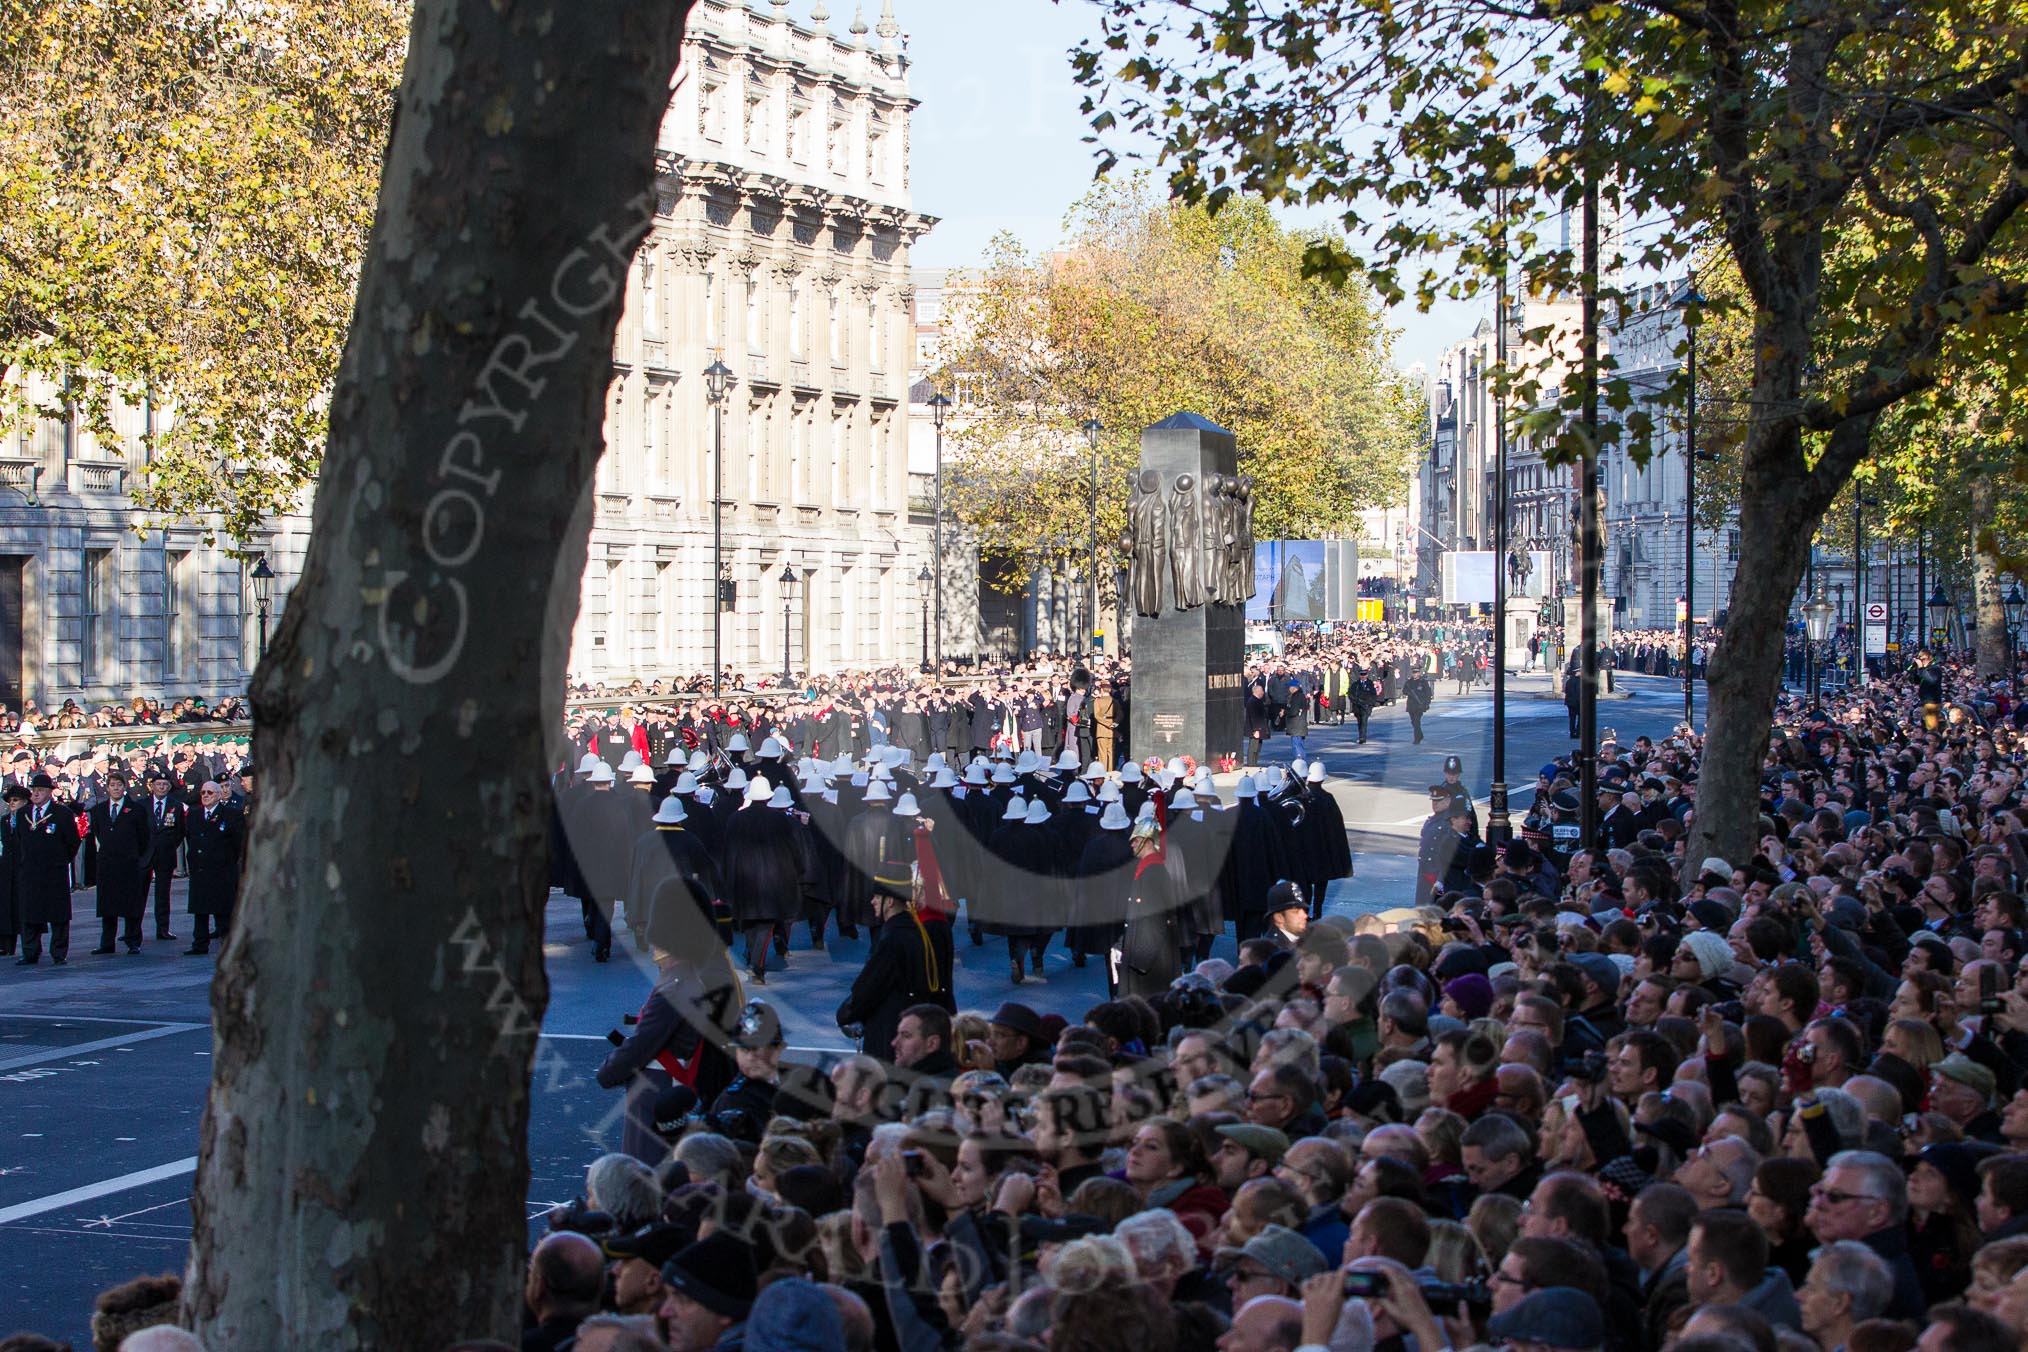 The Band of the Royal Marines gets into position on the eastern side of the Cenotaph, in front of the Memorial for Women in World War II.